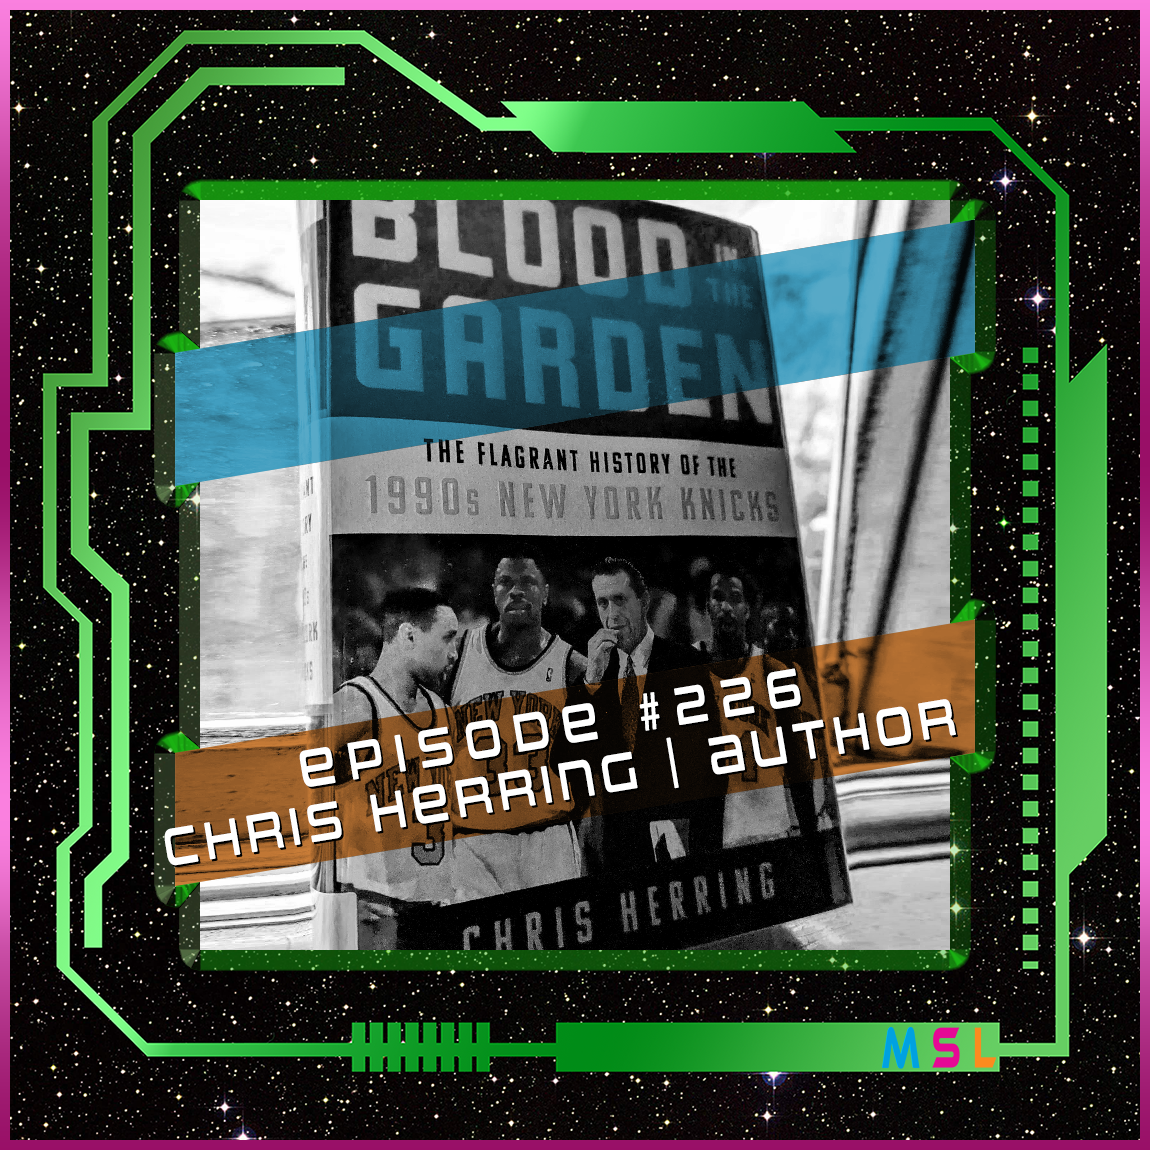 226 | Chris Herring (Blood In The Garden: The Flagrant History of The 1990s Knicks)